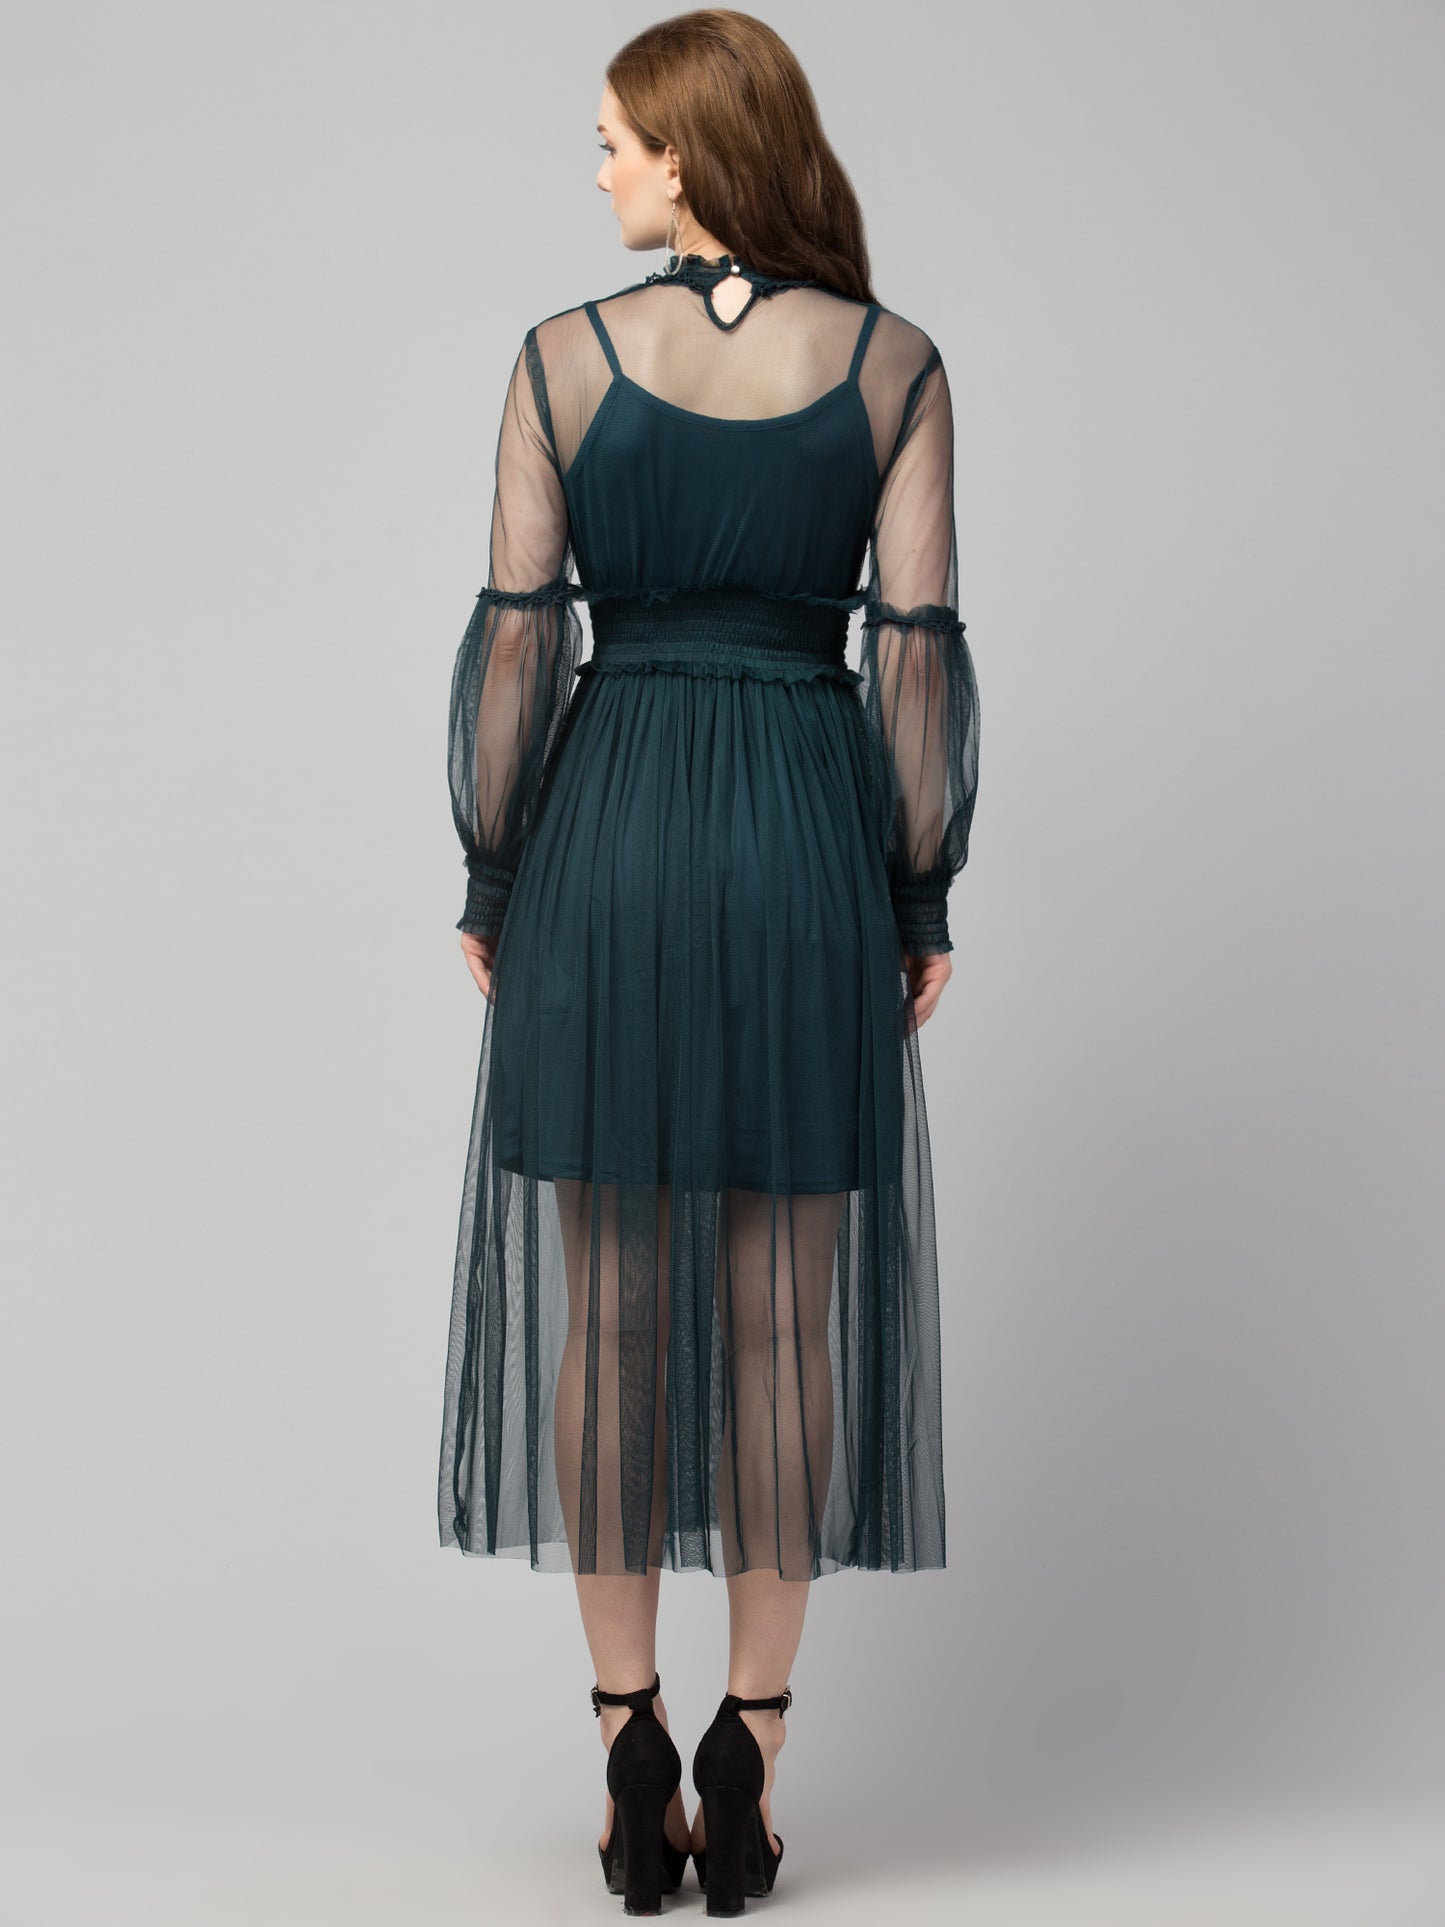 Green Lace Net Dress With Lining